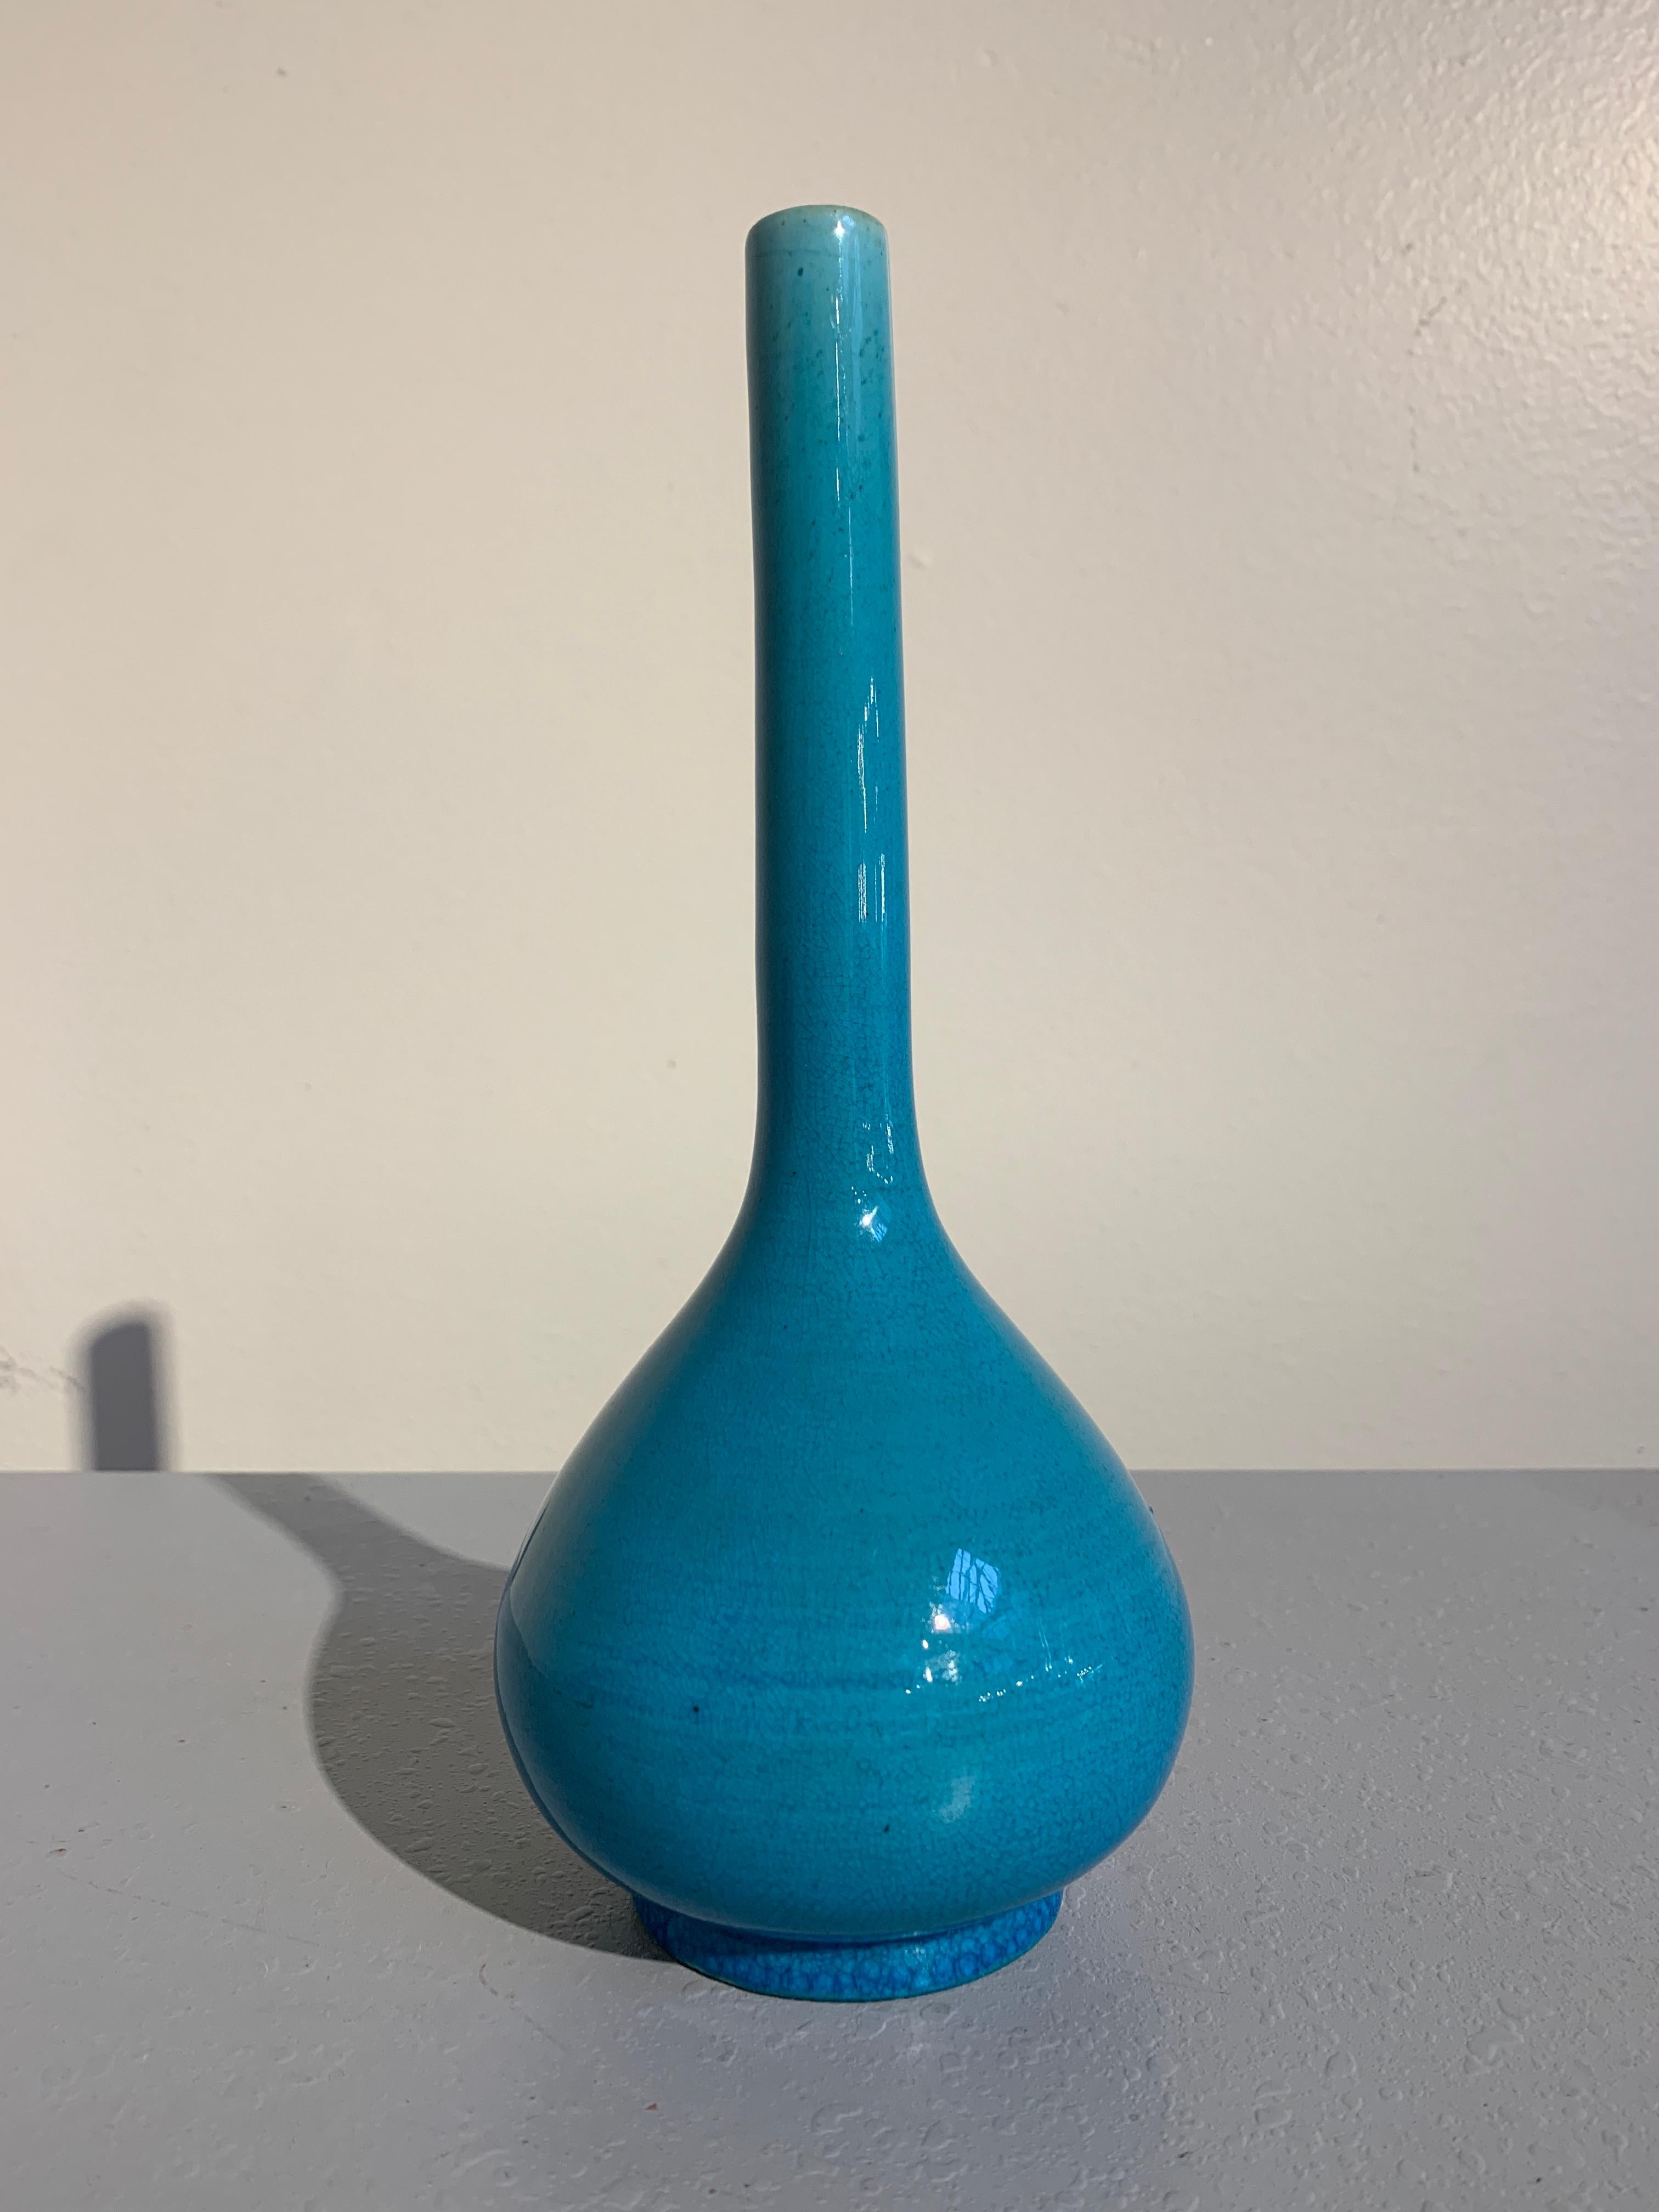 A fine and attractive monochrome turquoise glazed stick neck vase, Awaji Pottery, Meiji Period, Japan, circa 1900. 

The long neck vase beautifully potted and covered in a striking monochrome turquoise or peacock blue glaze. The pear shaped body